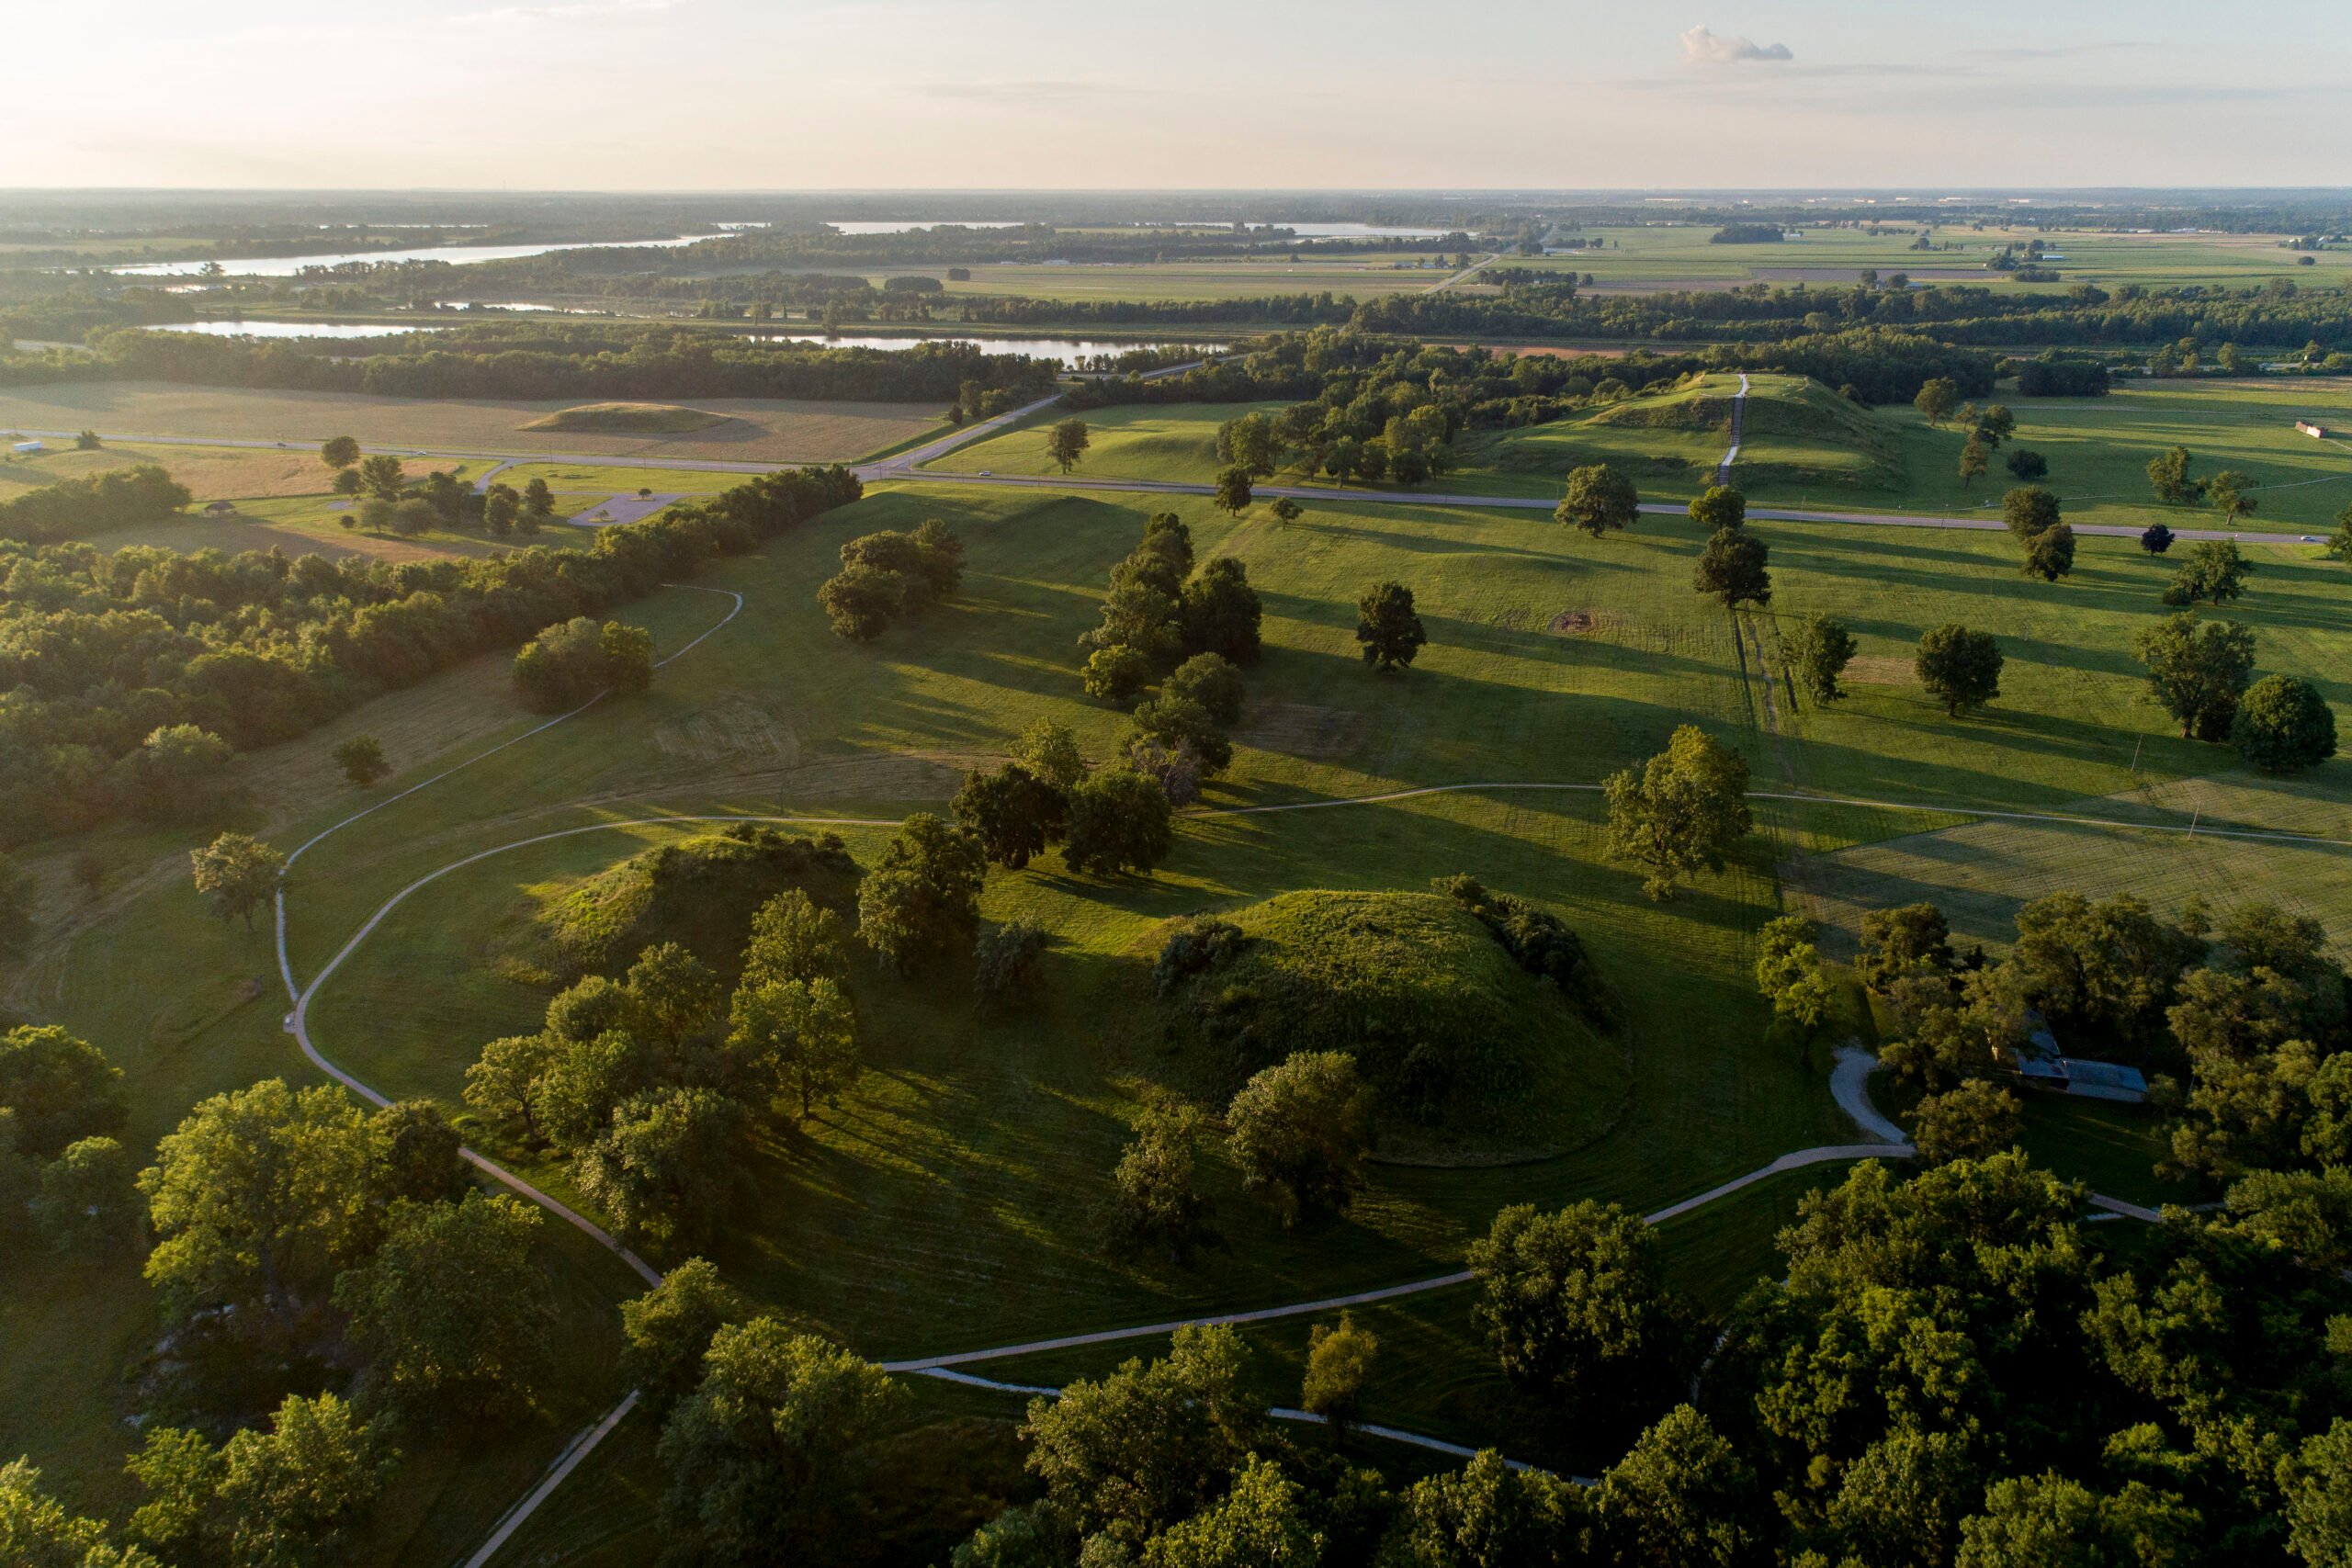 Daniel Acker's drone gets high enough to show all the land and trees surrounding the Cahokia mounds